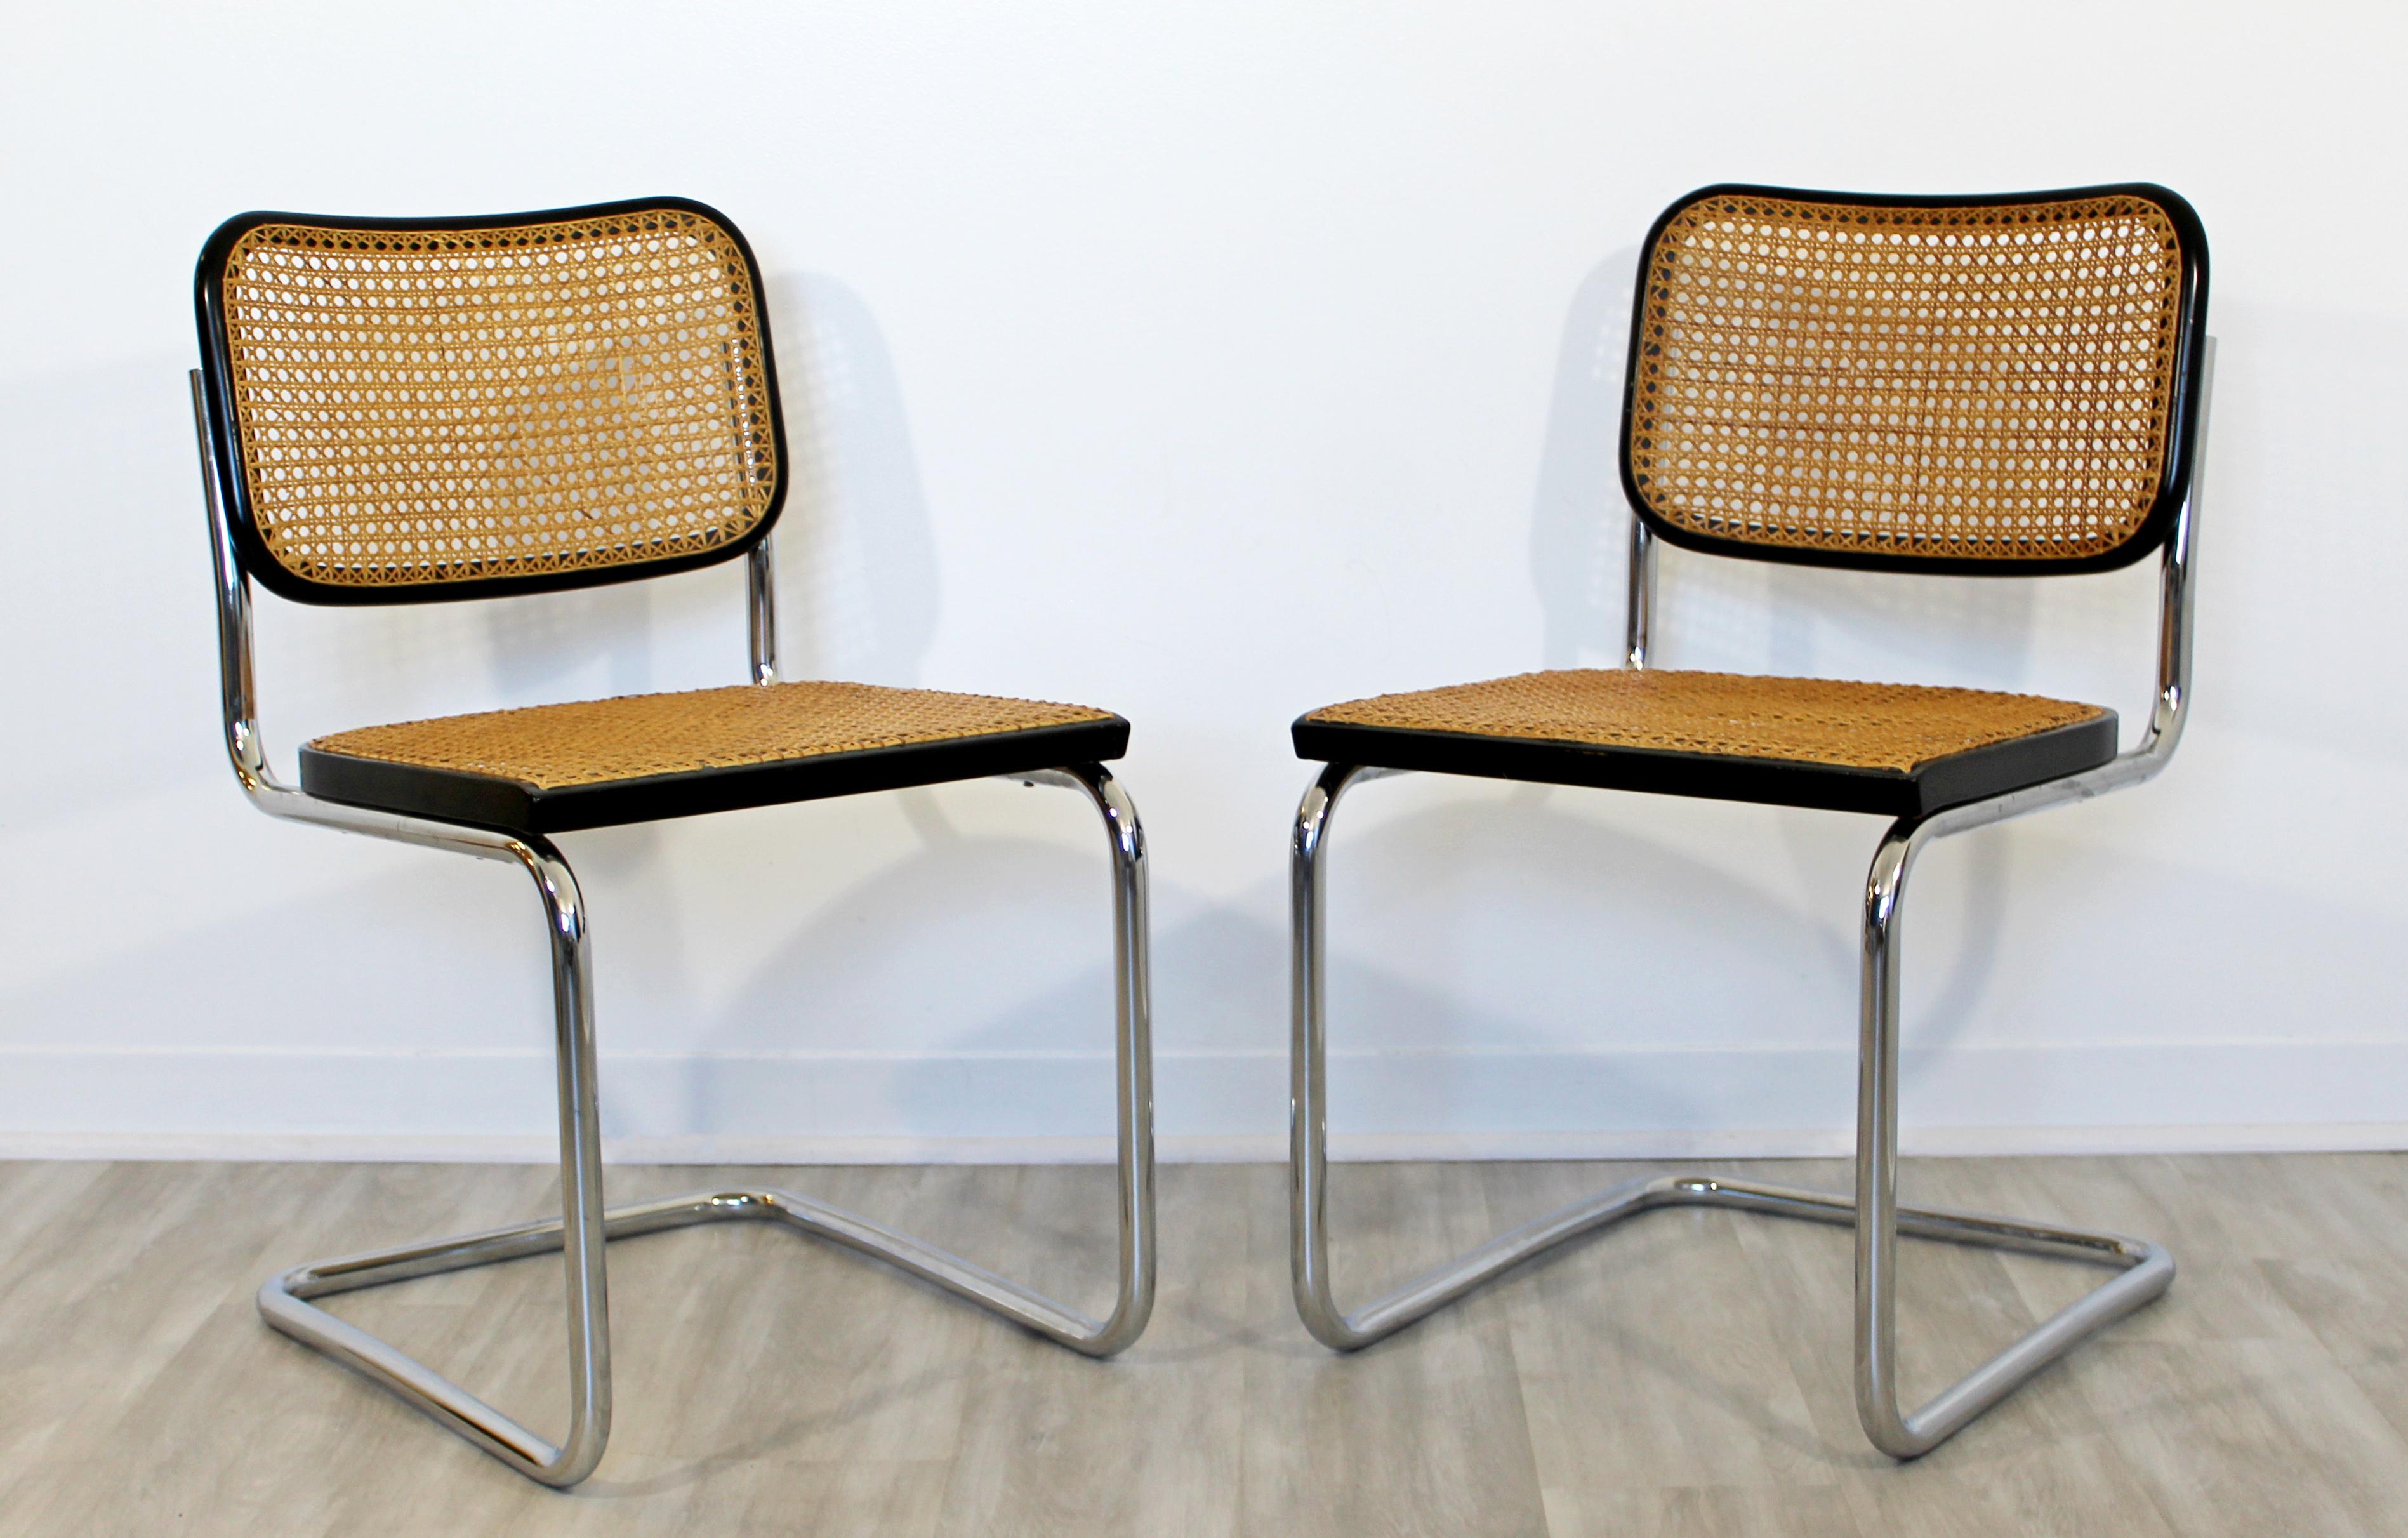 Italian Mid-Century Modern Breuer Knoll Set of 4 Cantilever Chrome and Cane Side Chairs